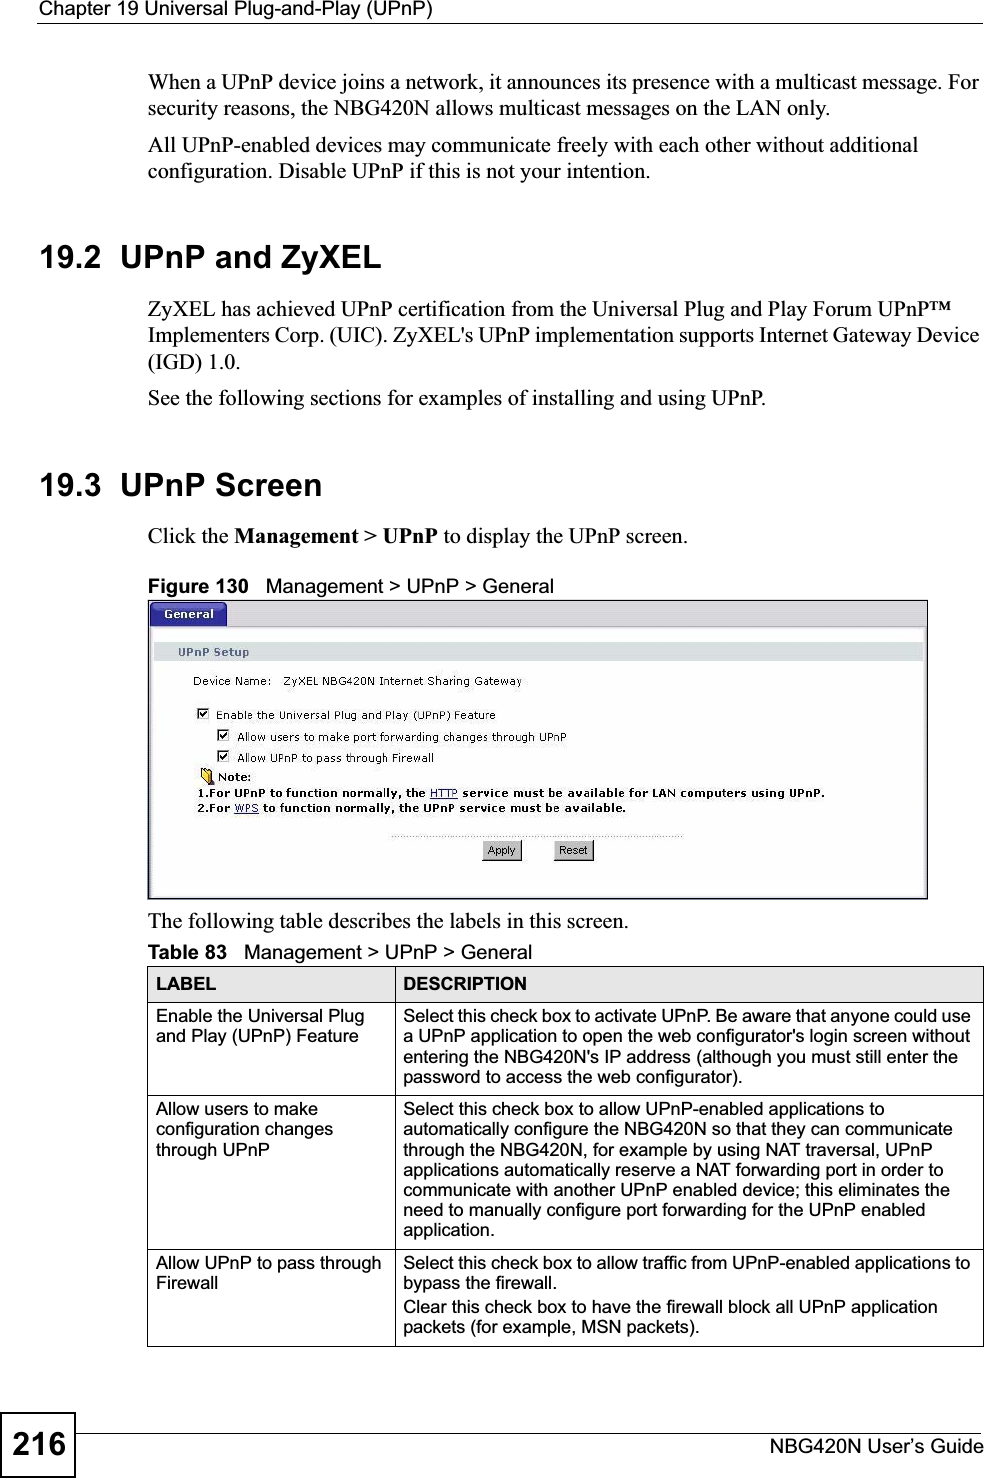 Chapter 19 Universal Plug-and-Play (UPnP)NBG420N User’s Guide216When a UPnP device joins a network, it announces its presence with a multicast message. For security reasons, the NBG420N allows multicast messages on the LAN only.All UPnP-enabled devices may communicate freely with each other without additional configuration. Disable UPnP if this is not your intention. 19.2  UPnP and ZyXELZyXEL has achieved UPnP certification from the Universal Plug and Play Forum UPnP™ Implementers Corp. (UIC). ZyXEL&apos;s UPnP implementation supports Internet Gateway Device (IGD) 1.0. See the following sections for examples of installing and using UPnP.19.3  UPnP ScreenClick the Management &gt; UPnP to display the UPnP screen.Figure 130   Management &gt; UPnP &gt; General The following table describes the labels in this screen. Table 83   Management &gt; UPnP &gt; GeneralLABEL DESCRIPTIONEnable the Universal Plug and Play (UPnP) FeatureSelect this check box to activate UPnP. Be aware that anyone could use a UPnP application to open the web configurator&apos;s login screen without entering the NBG420N&apos;s IP address (although you must still enter the password to access the web configurator).Allow users to make configuration changes through UPnPSelect this check box to allow UPnP-enabled applications to automatically configure the NBG420N so that they can communicate through the NBG420N, for example by using NAT traversal, UPnP applications automatically reserve a NAT forwarding port in order to communicate with another UPnP enabled device; this eliminates the need to manually configure port forwarding for the UPnP enabled application. Allow UPnP to pass through FirewallSelect this check box to allow traffic from UPnP-enabled applications to bypass the firewall. Clear this check box to have the firewall block all UPnP application packets (for example, MSN packets).